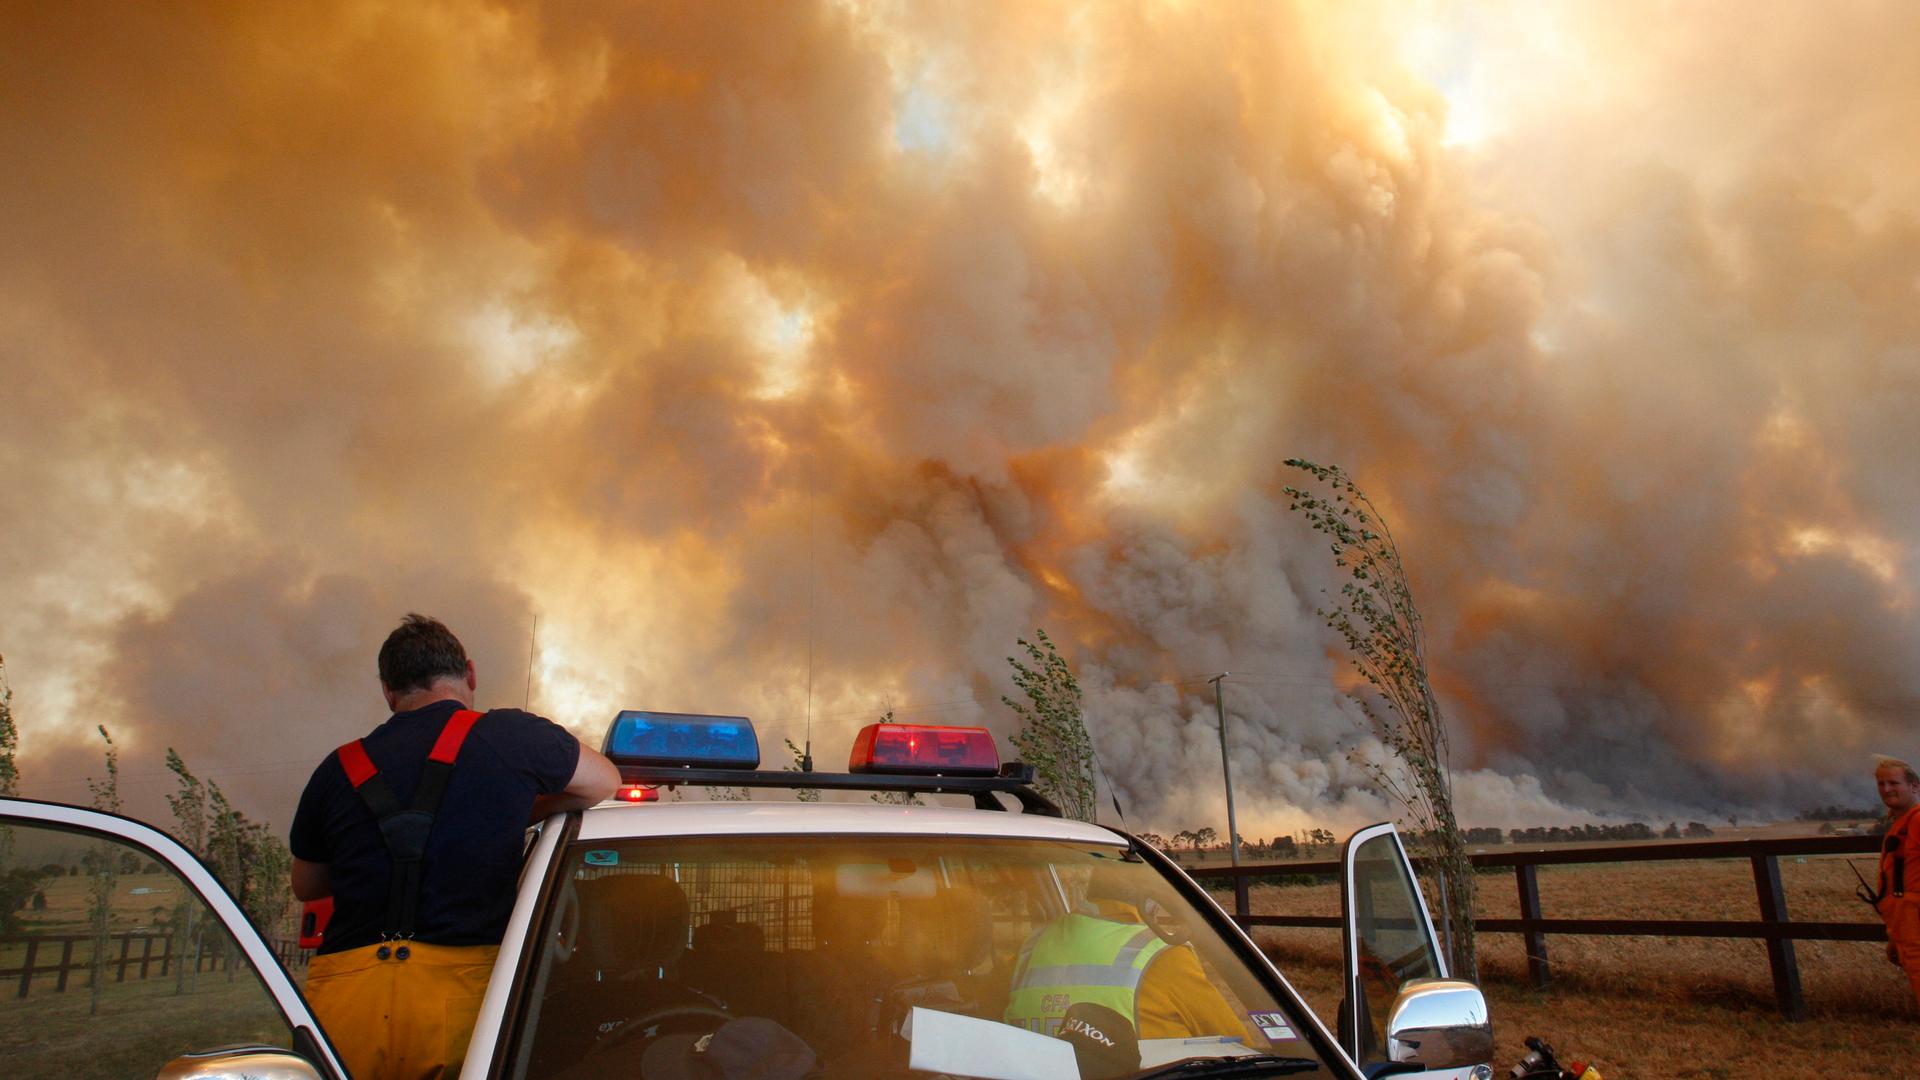 A fireman climbs down from his truck as a bushfire approaches a town outside of of Melbourne, Australia in February, 2009. Officials blamed the dozens of blazes across the country five years ago on a "once in a century" heatwave. With climate change incre